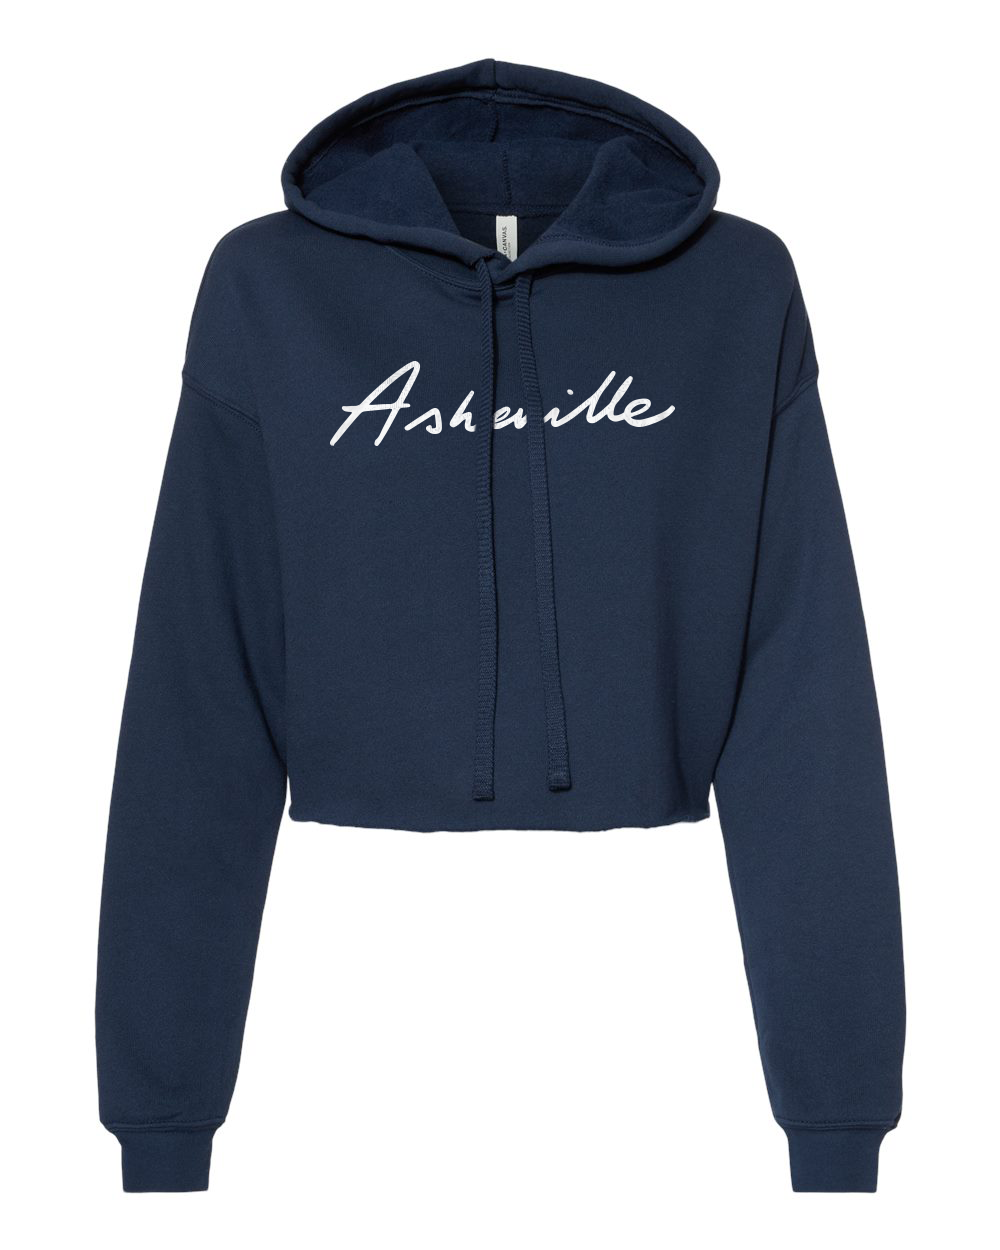 Asheville Script Cropped Hoodie